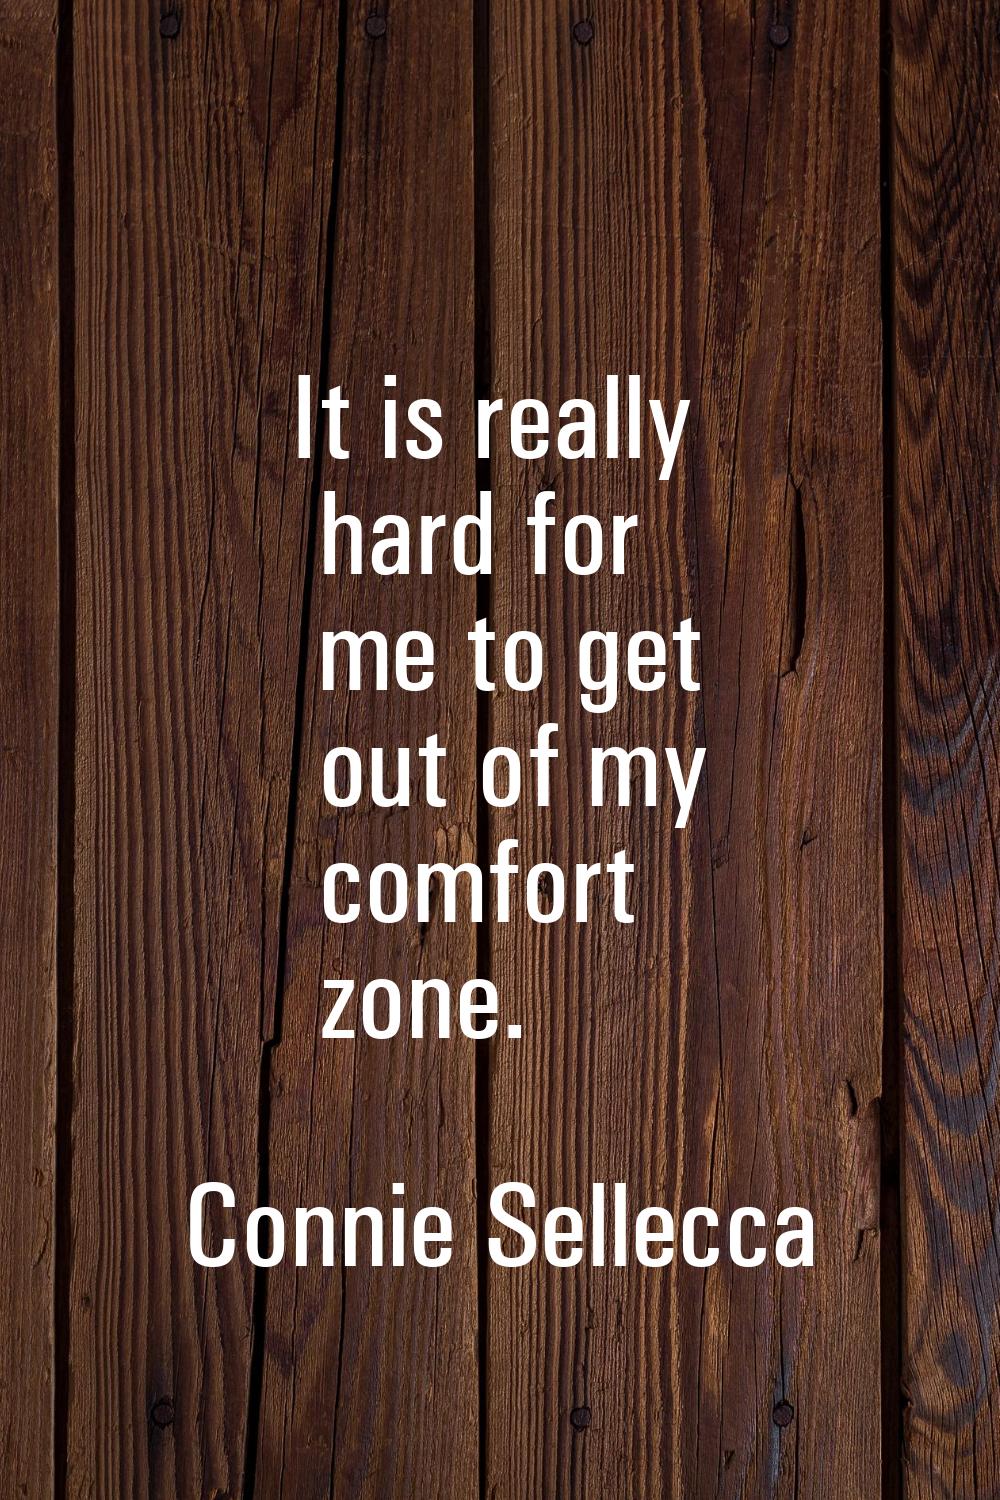 It is really hard for me to get out of my comfort zone.